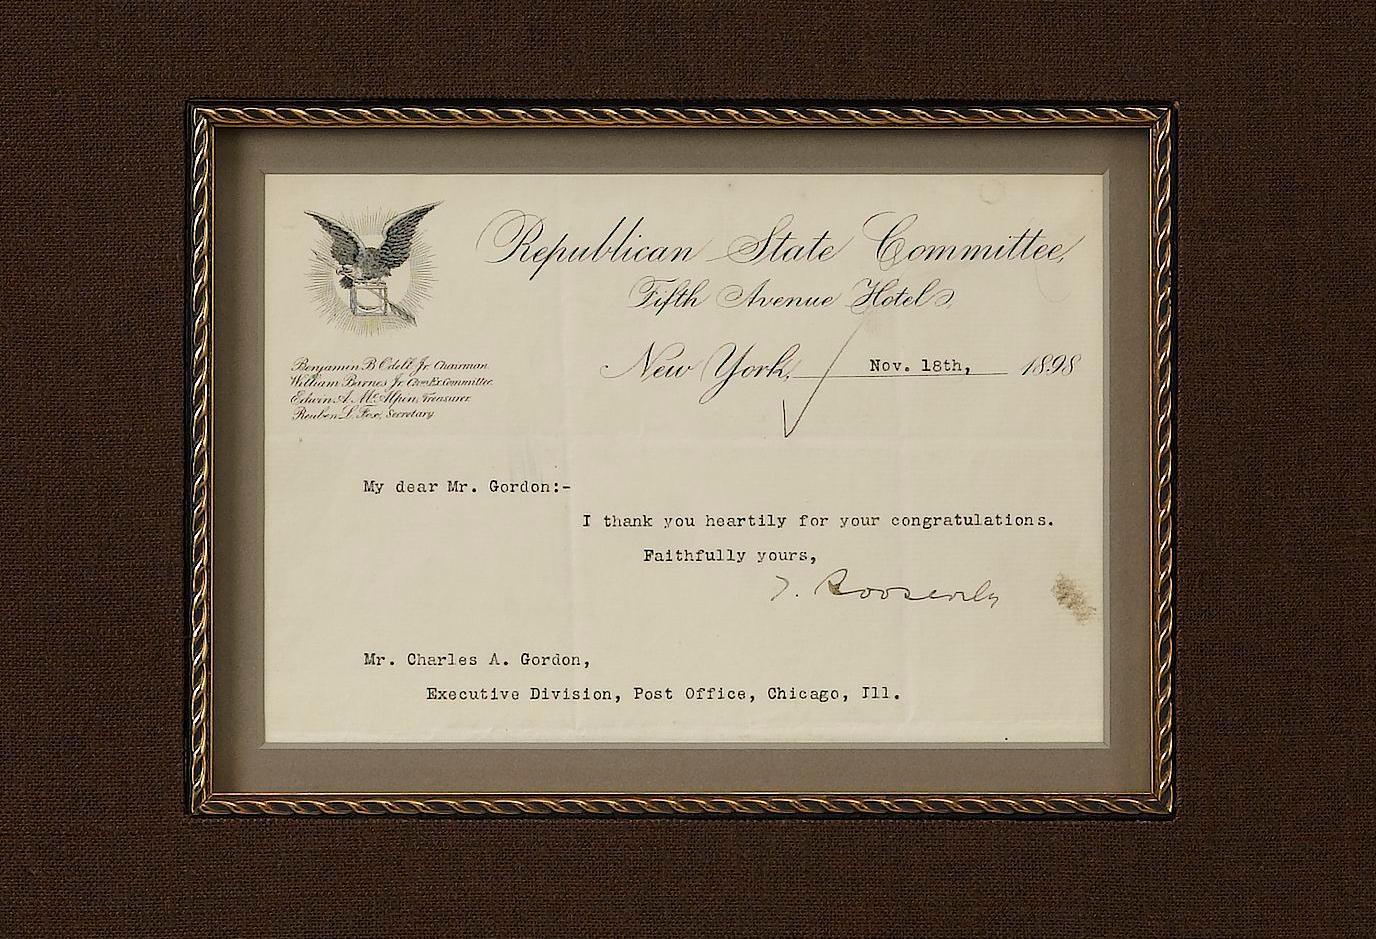 American Theodore Roosevelt Typed Letter Signed to Charles Gordon, November 18, 1898